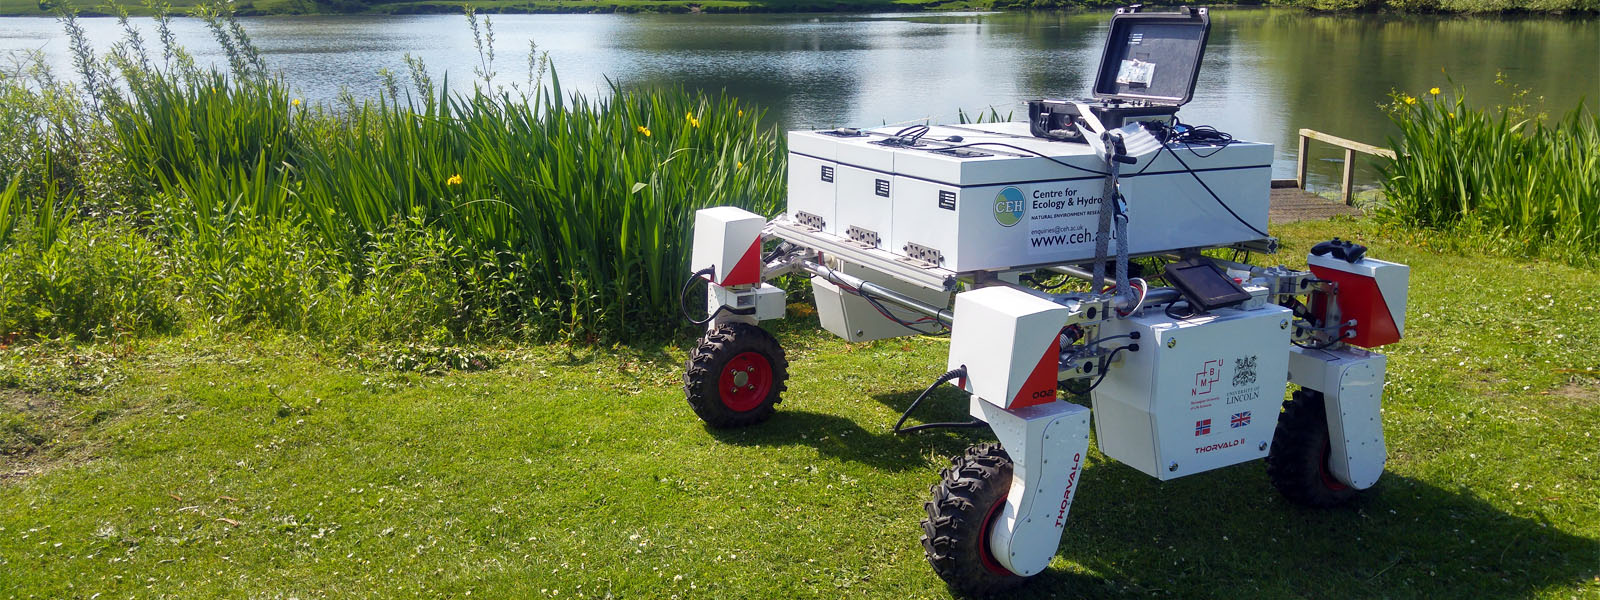 Thorvald robot on a grass bank near water